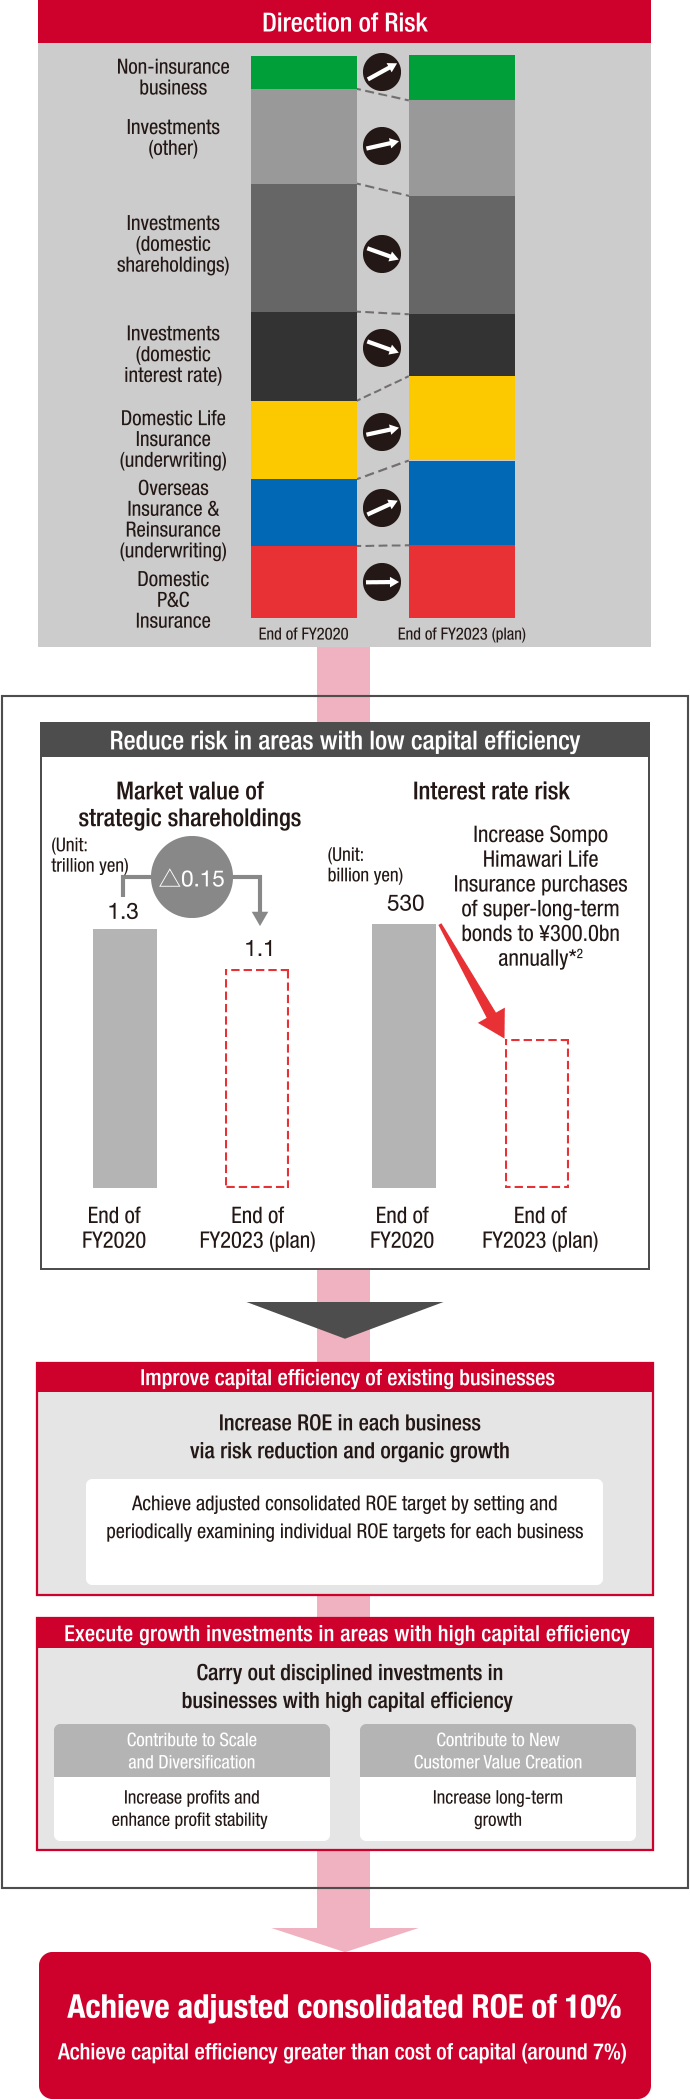 figure:Direction of Risk, Reduce risk in areas with low capital efficiency, Improve capital efficiency of existing businesses, Execute growth investments in areas with high capital efficiency→Achieve adjusted consolidated ROE of 10%